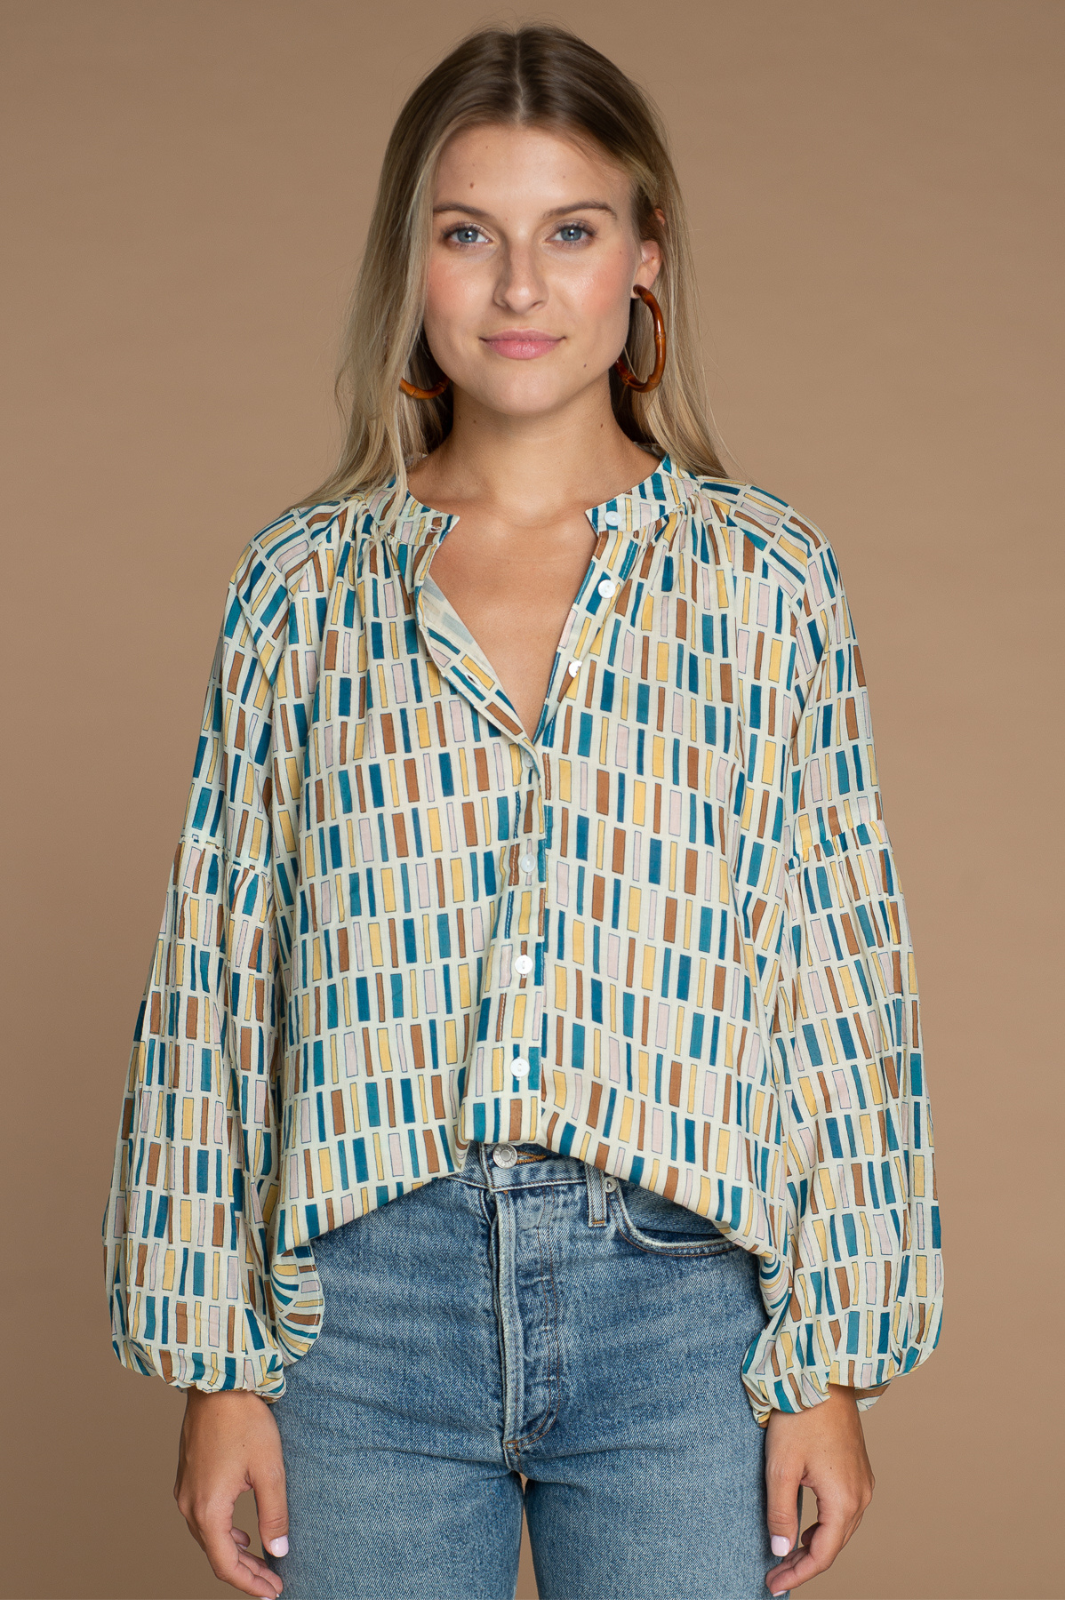 Olivia James The Label Emory Blouse in City Block